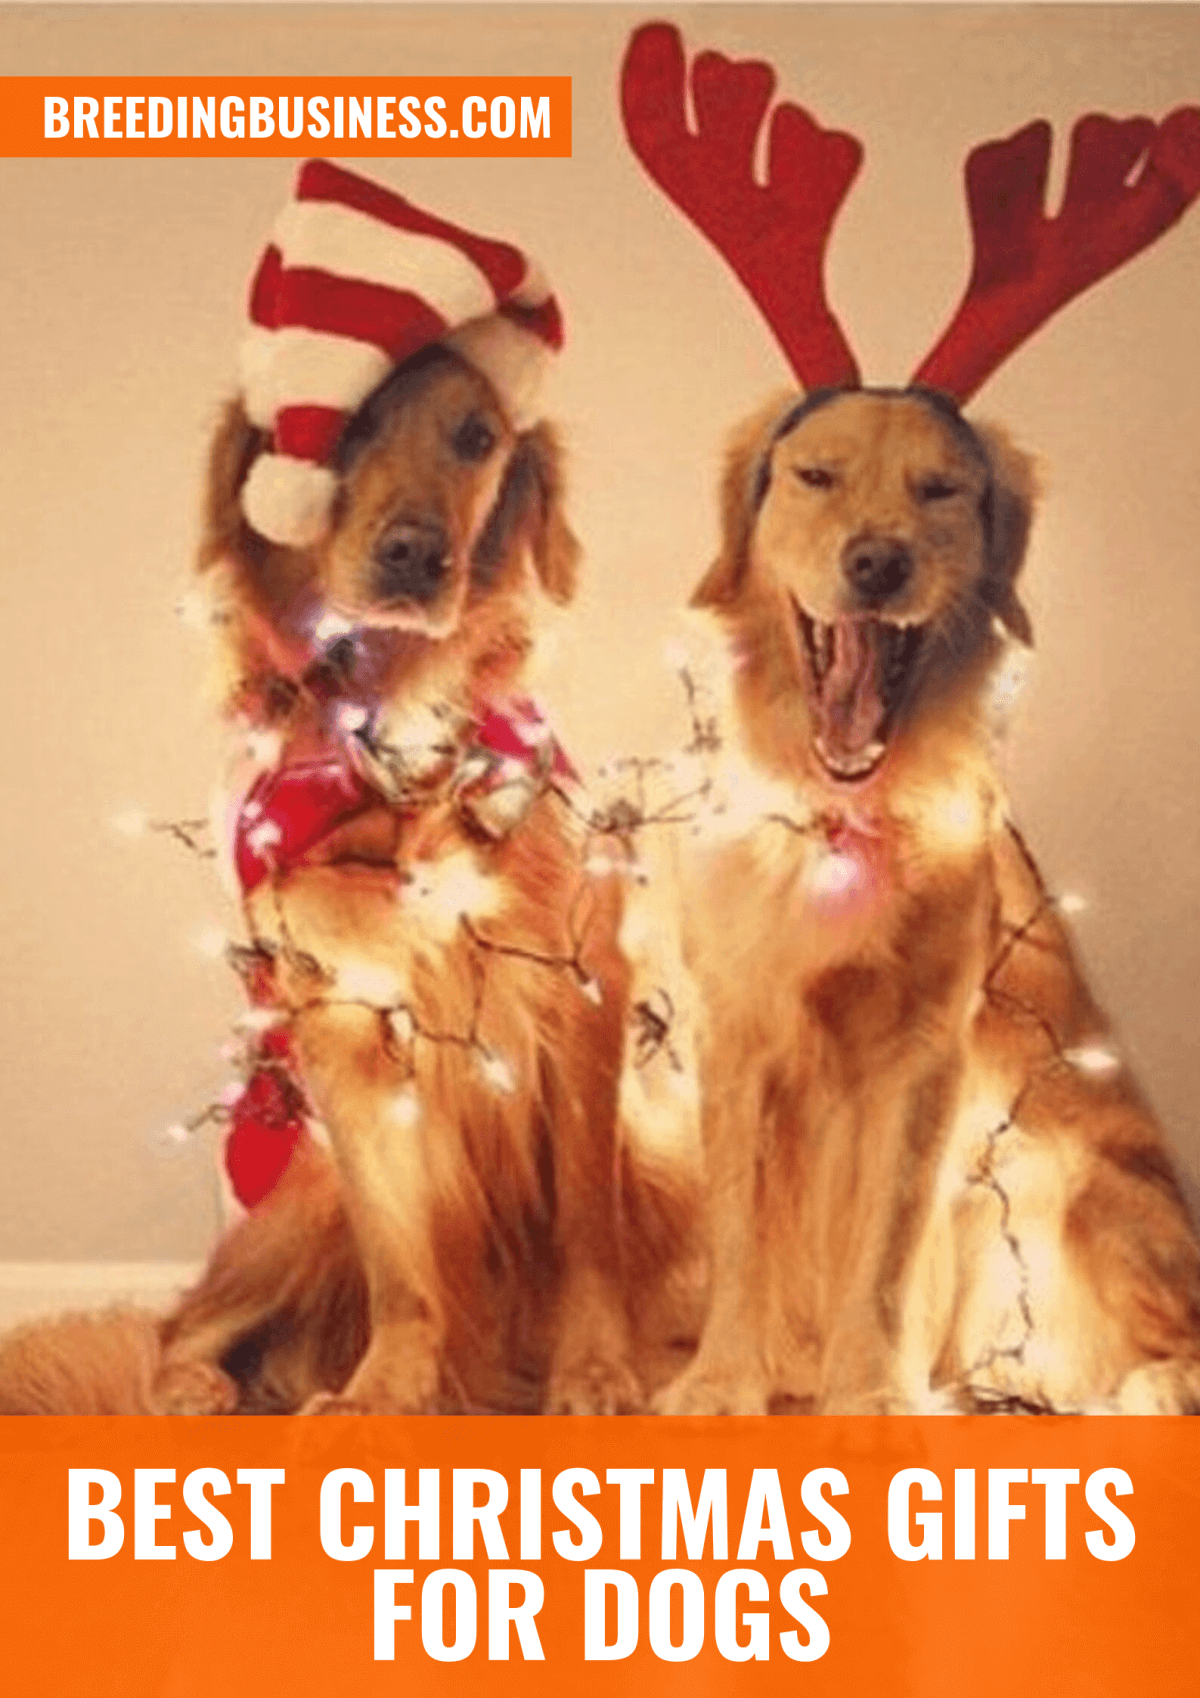 Top Christmas Gifts for Dogs